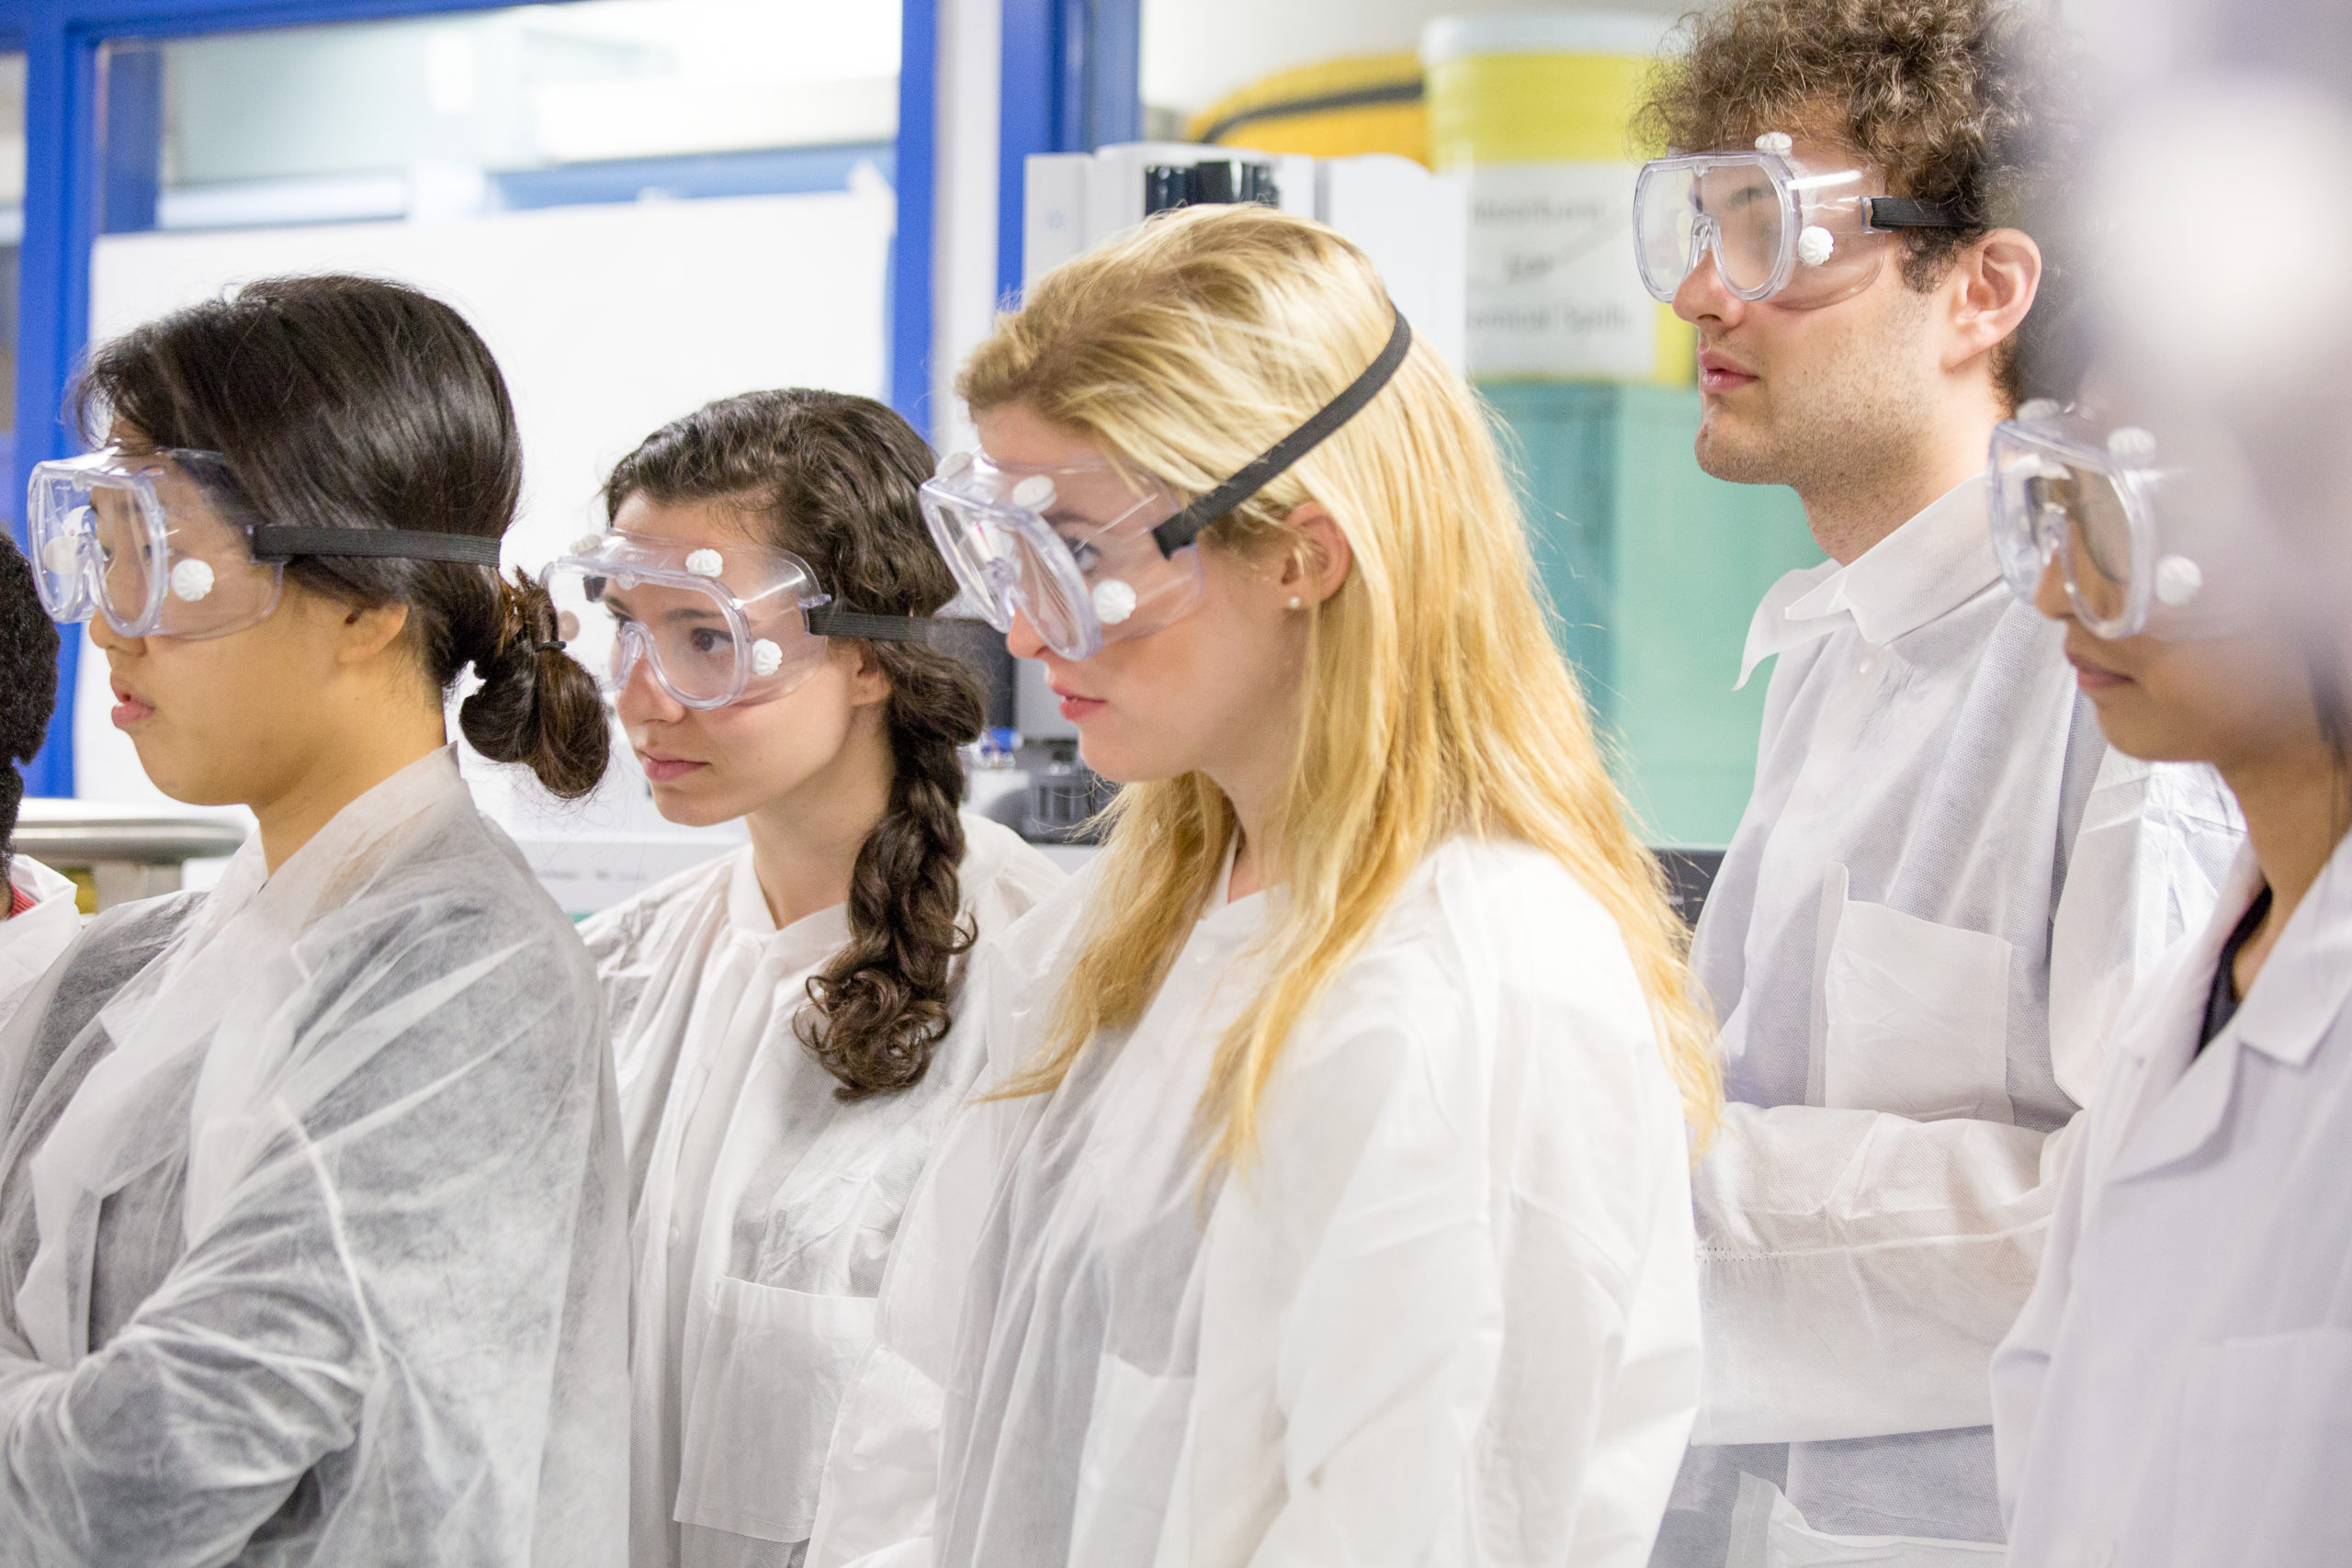 Students in a lab wearing safety equipment.